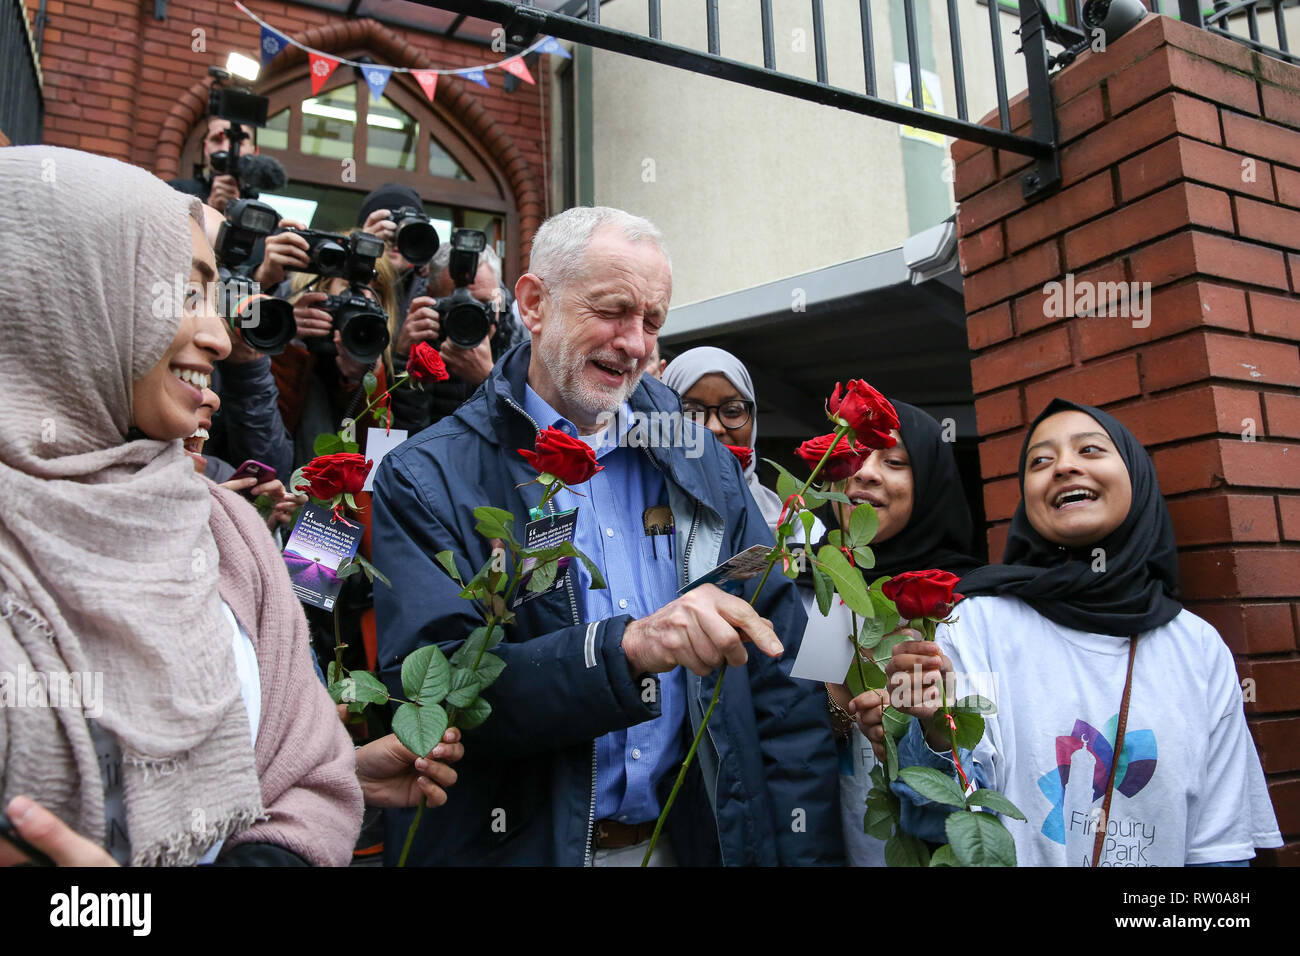 Labour leader Jeremy Corbyn is seen with flowers during the fourth Visit My Mosque Day at Finsbury Park Mosque in North London. Over 250 mosques open their doors to non-Muslim guests and visitors on the fourth Visit My Mosque Day. This year the national event also encourages mosques to support Keep Britain Tidy's Great British Spring Clean campaign with many already taking part in cleaning their communities. Later a man thought to be a pro-Brexit campaigner was arrested after he pressed down an egg on Jeremy Corbyn’s head. Stock Photo